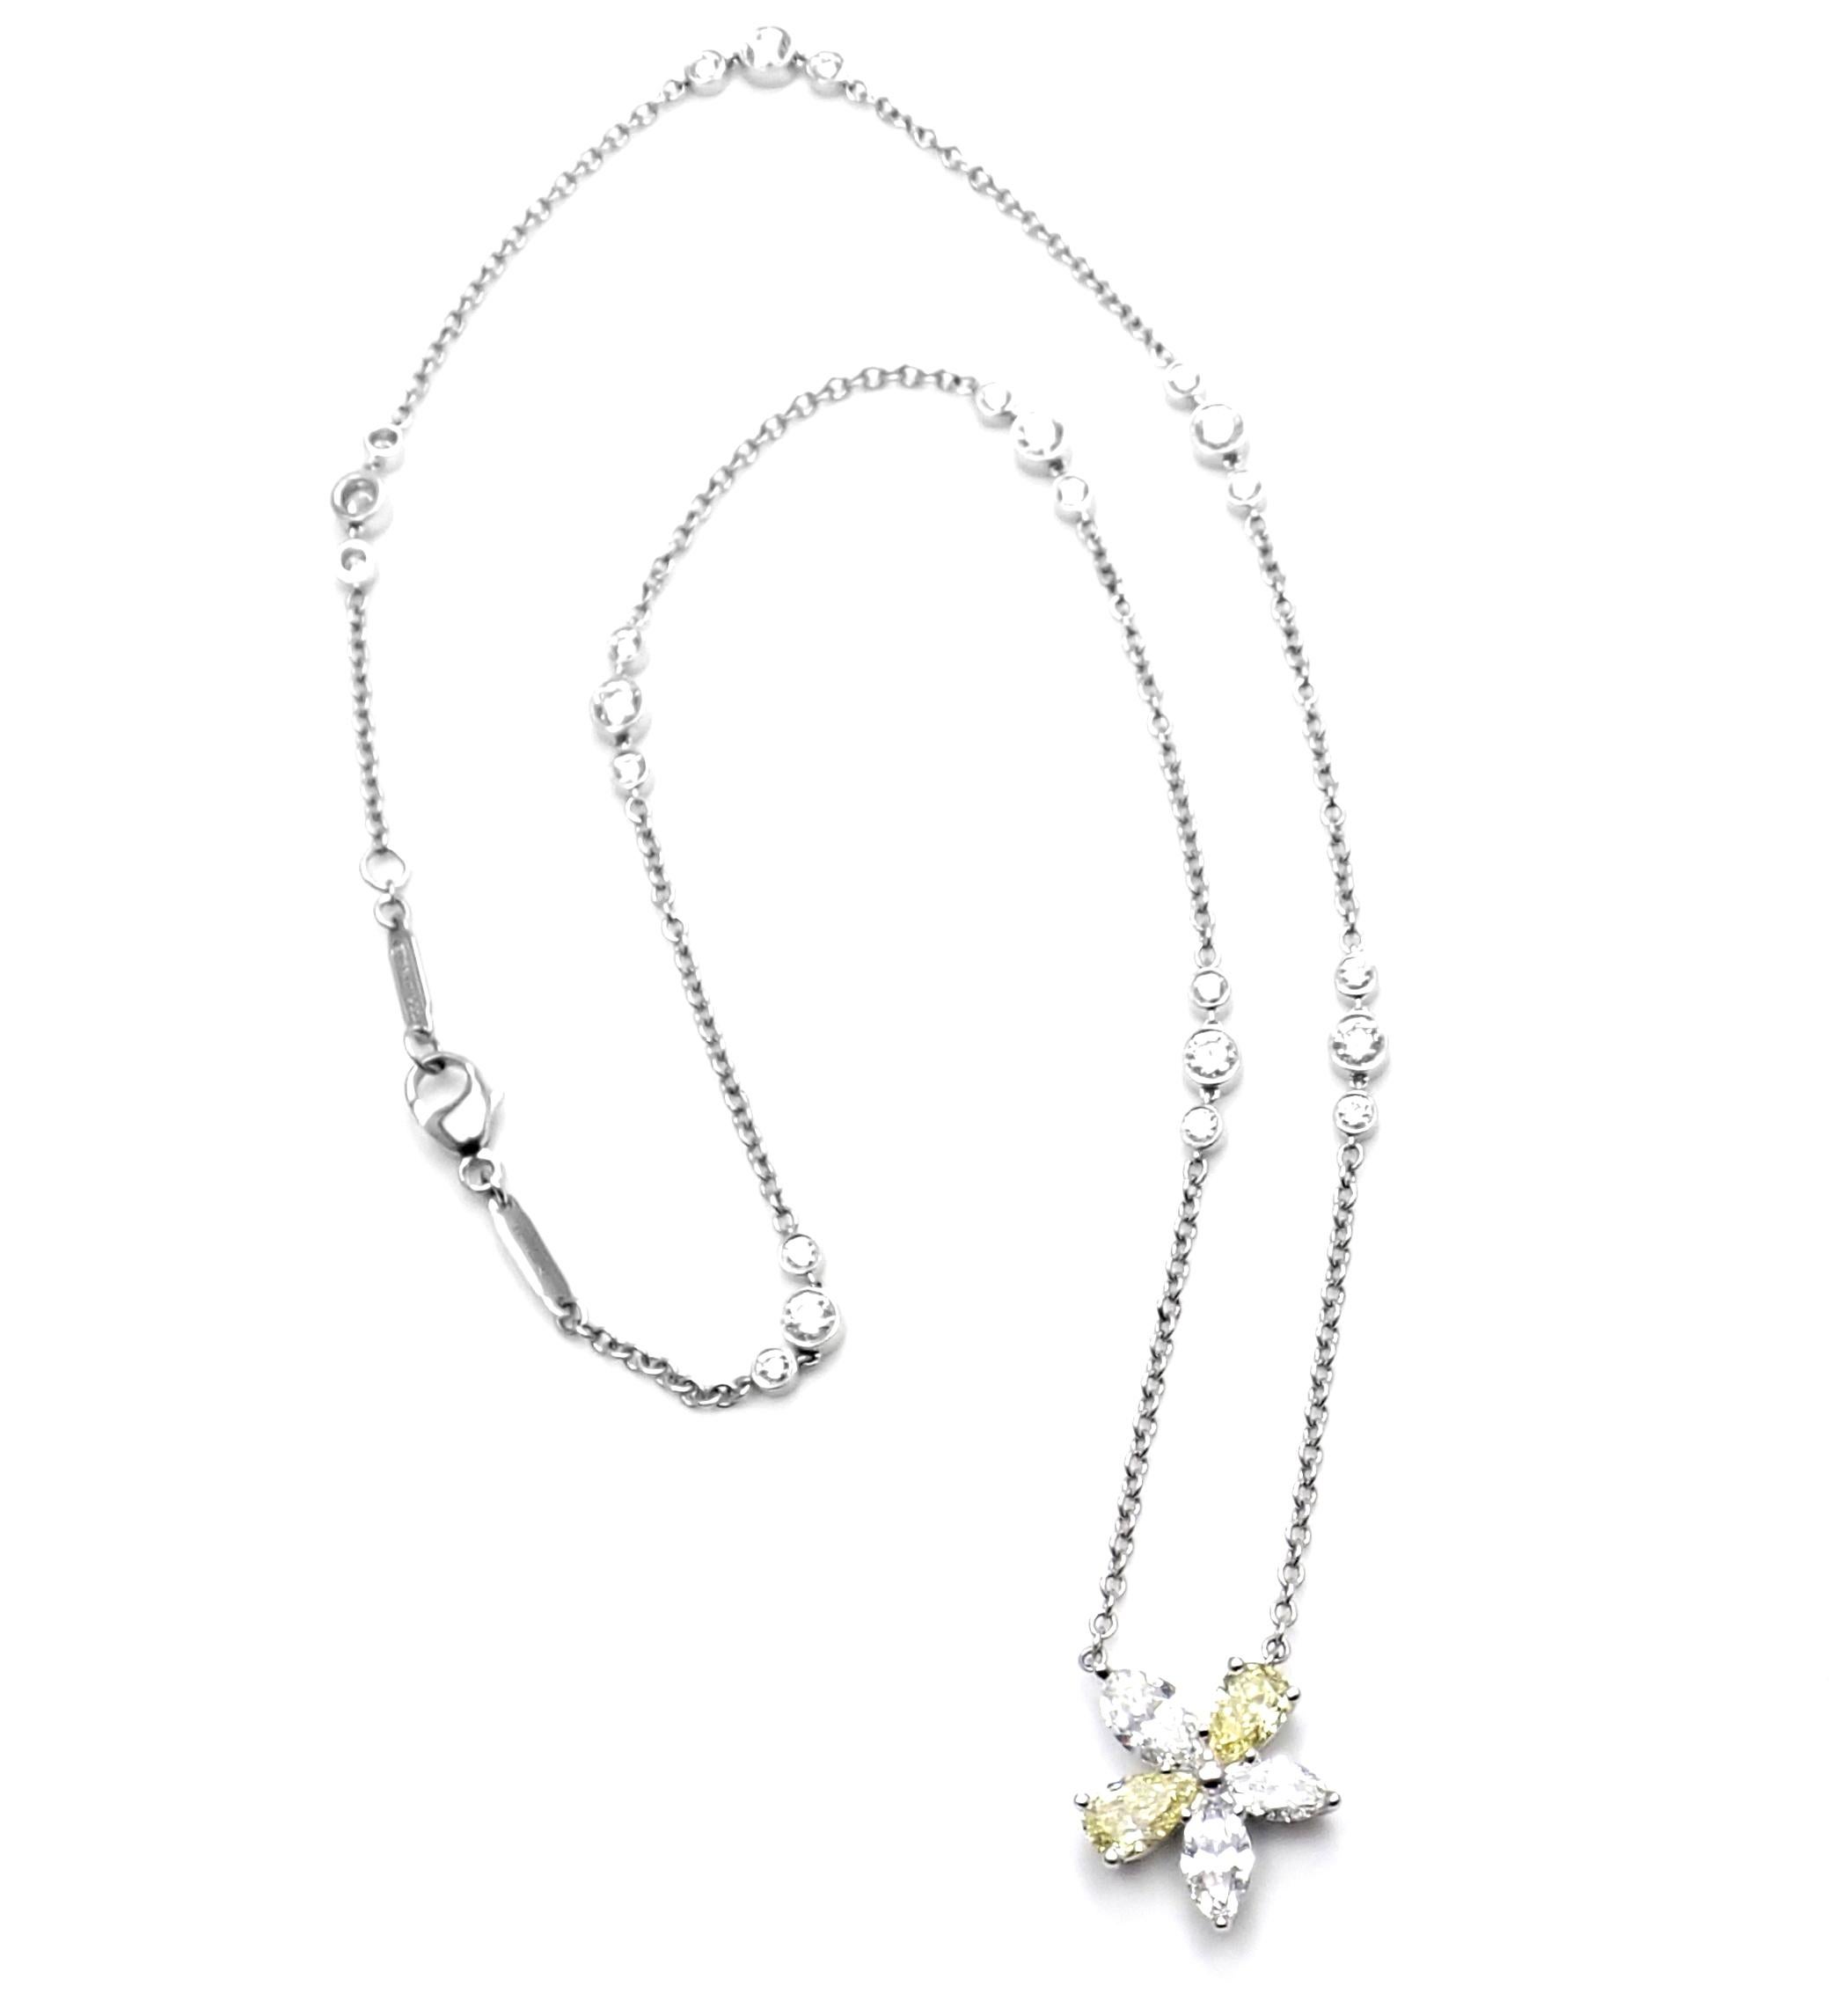 Platinum Victoria Yellow & White Diamond Pendant Necklace by Tiffany & Co. 
With 2 pear shape fancy intense yellow color diamonds total weight approx. .68ct
24 round brilliant cut diamonds Flawless - VS2 clarity and D-G color total weight approx.